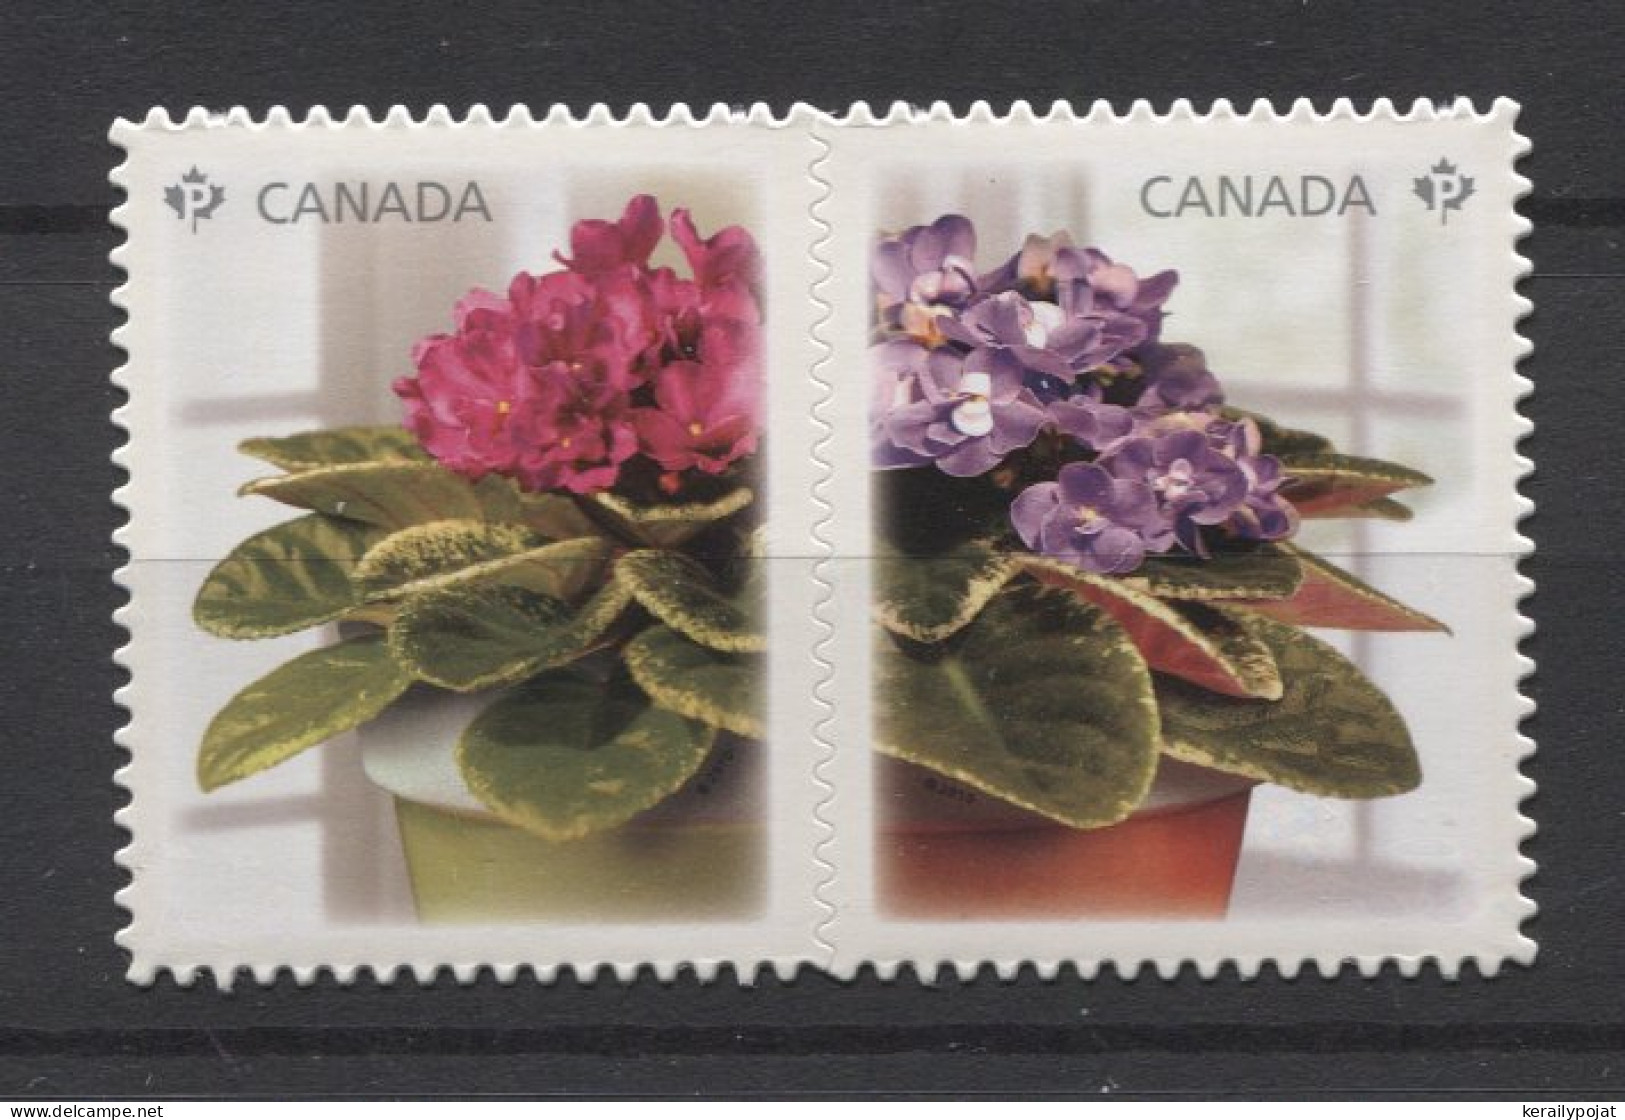 Canada - 2010 African Violets Self-adhesive__(TH-24847) - Unused Stamps